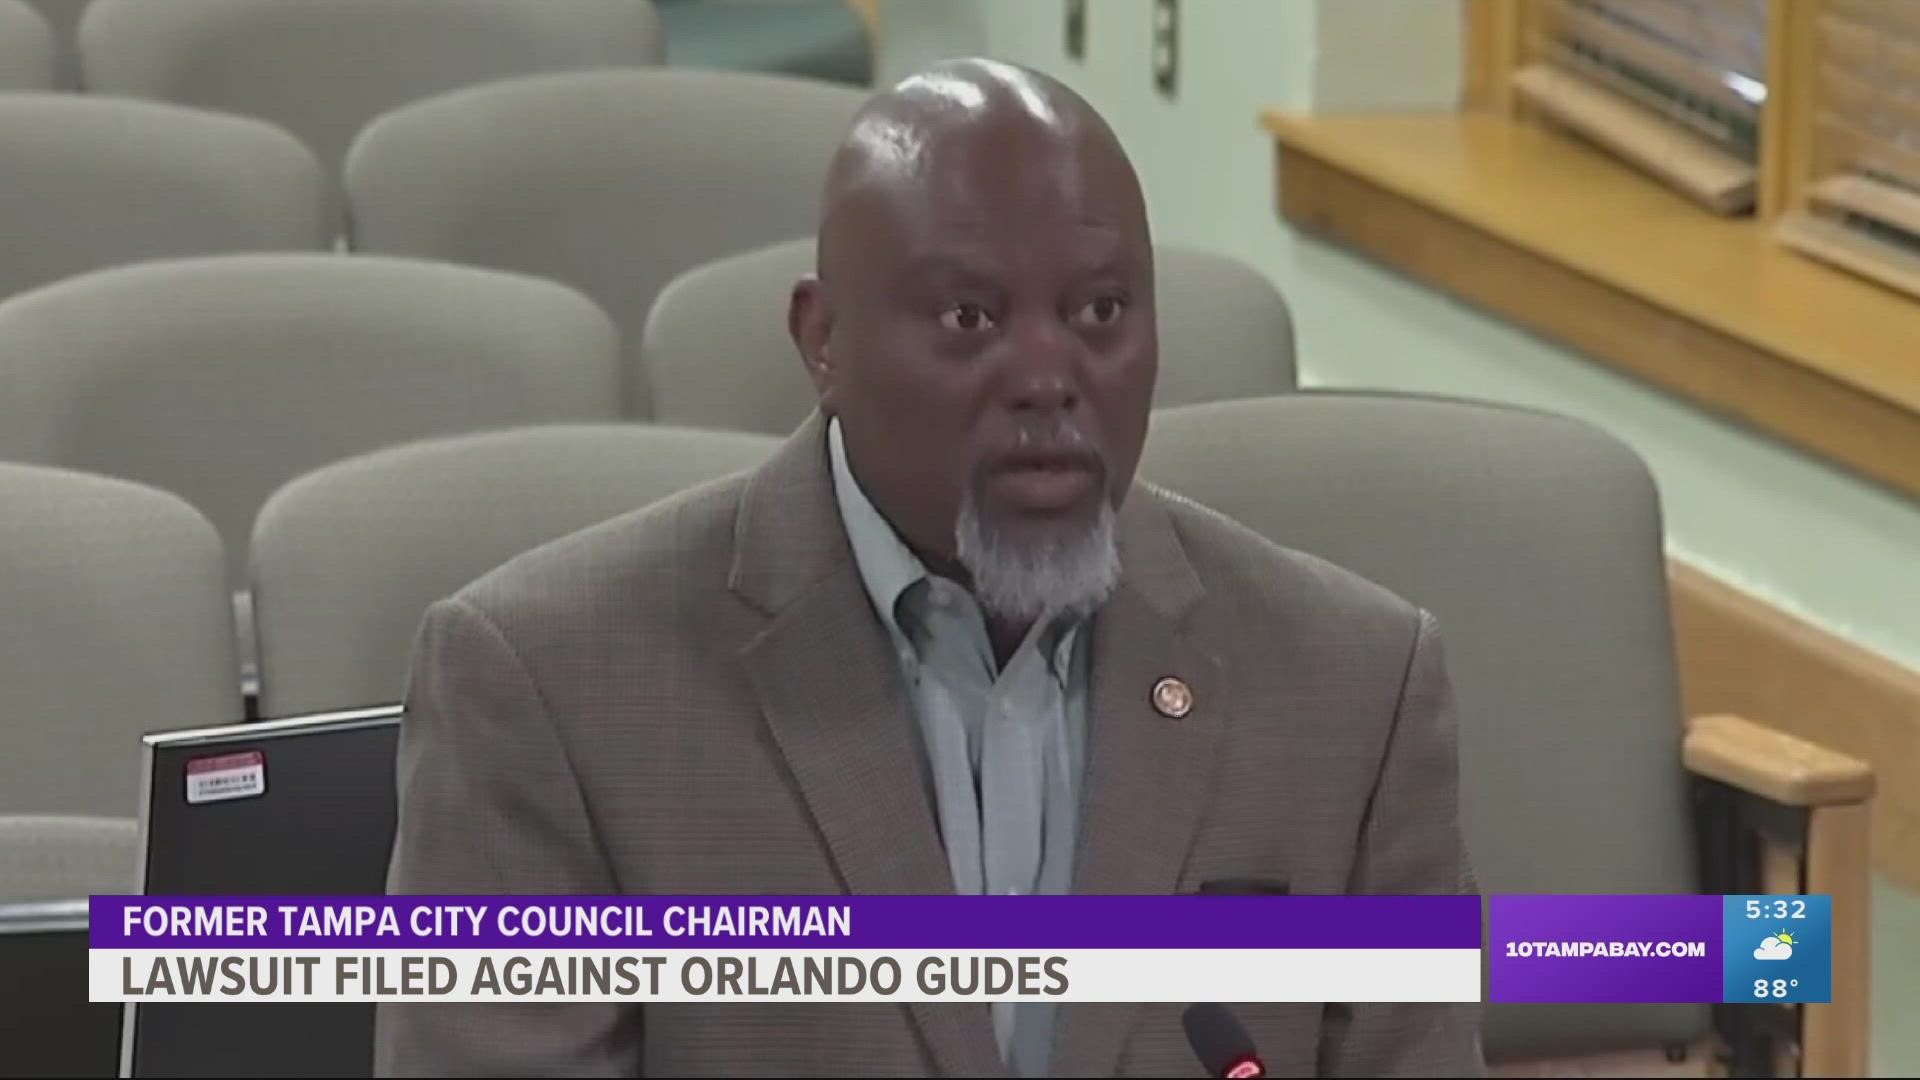 The investigation into the now-former Tampa City Council chairman Orlando Gudes continues as his former aide recently filed a lawsuit on behalf of her daughter again